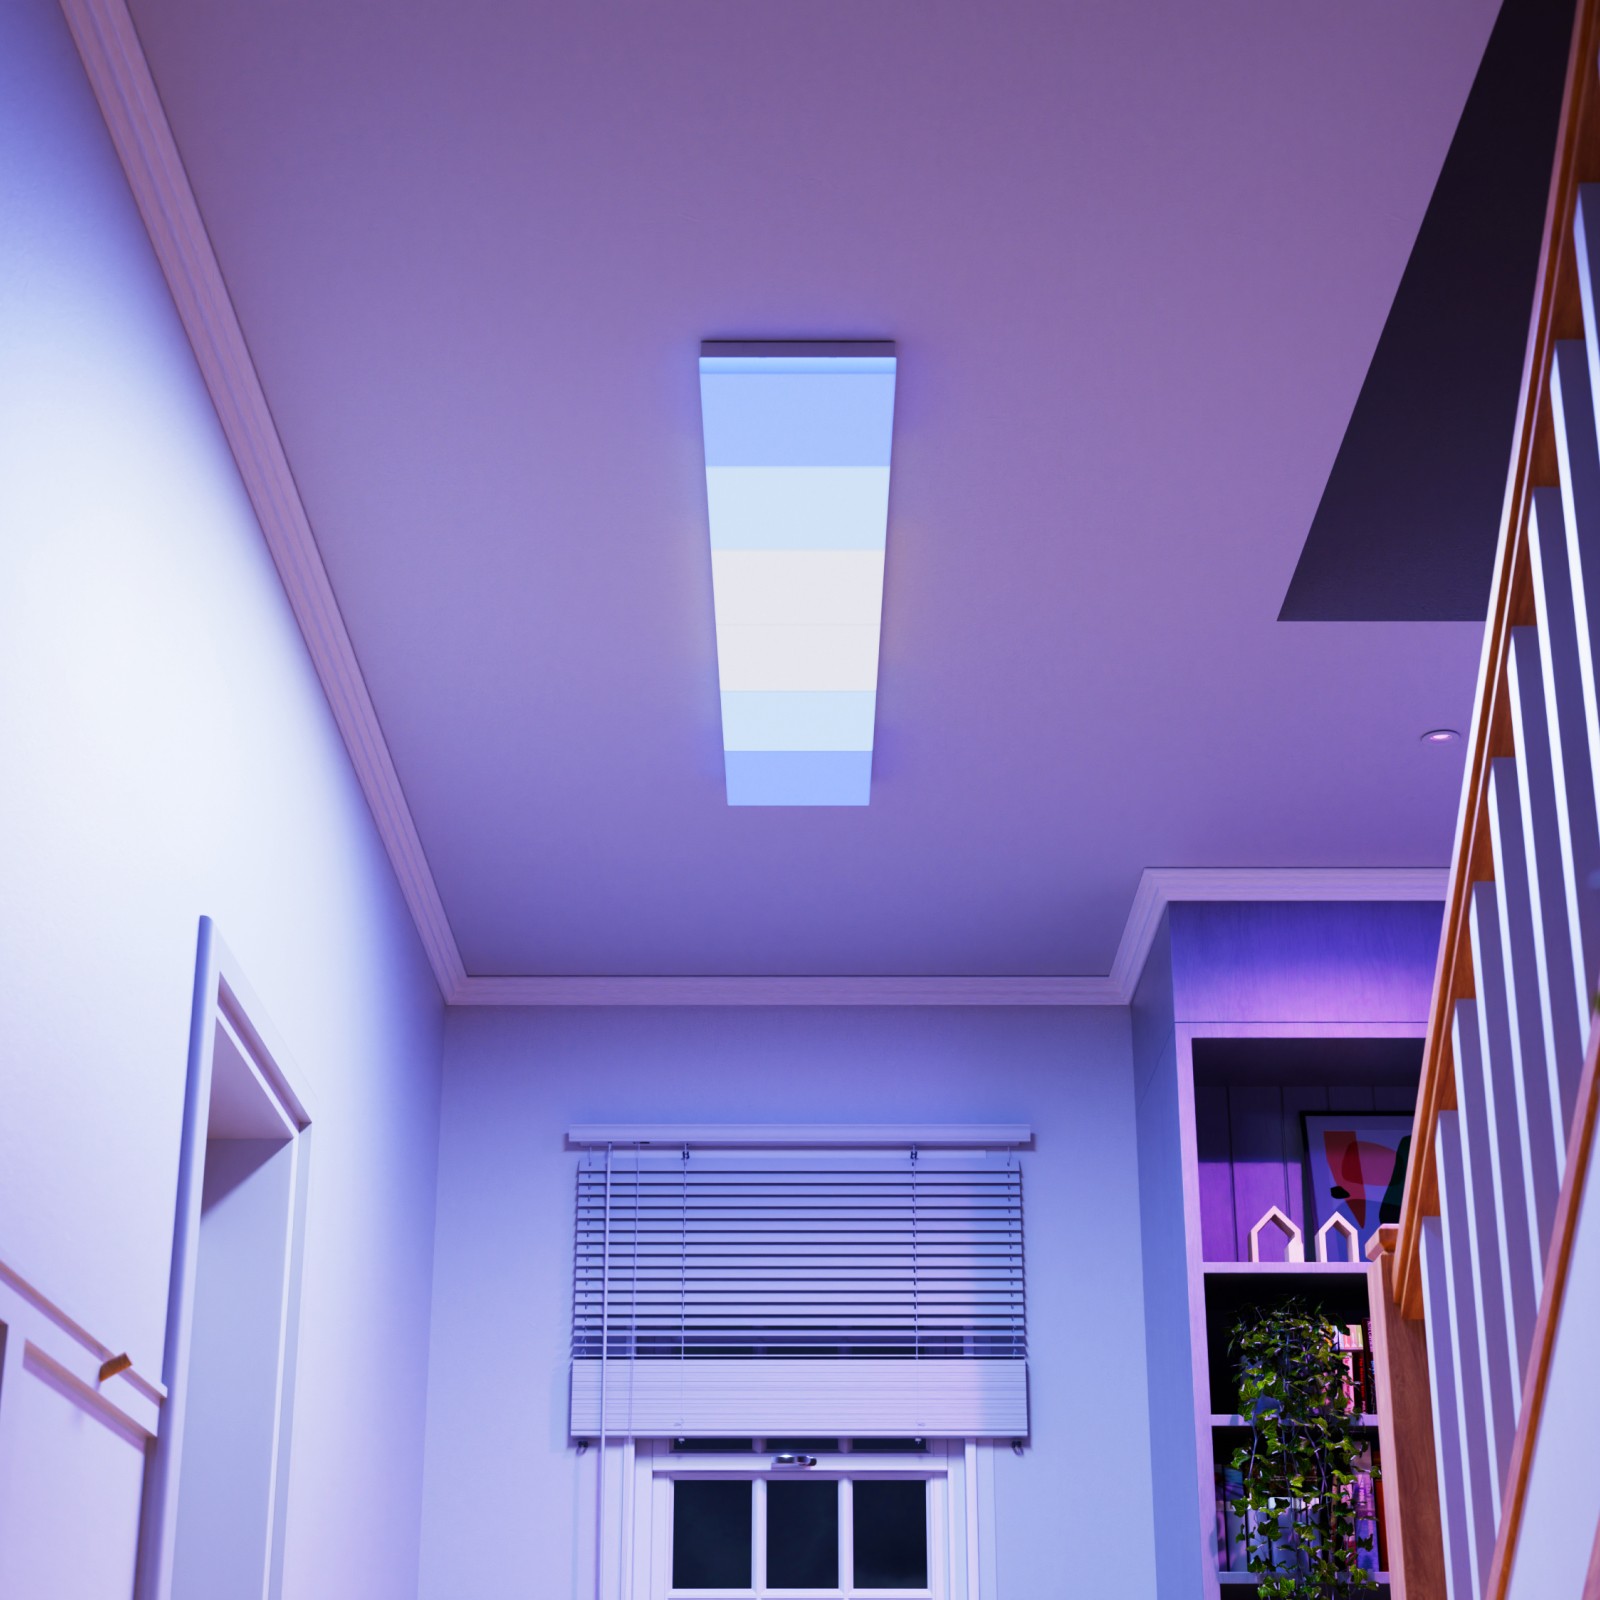 Shop Products | Smart Nanoleaf LED & United » States Consumer Products » IoT Lighting